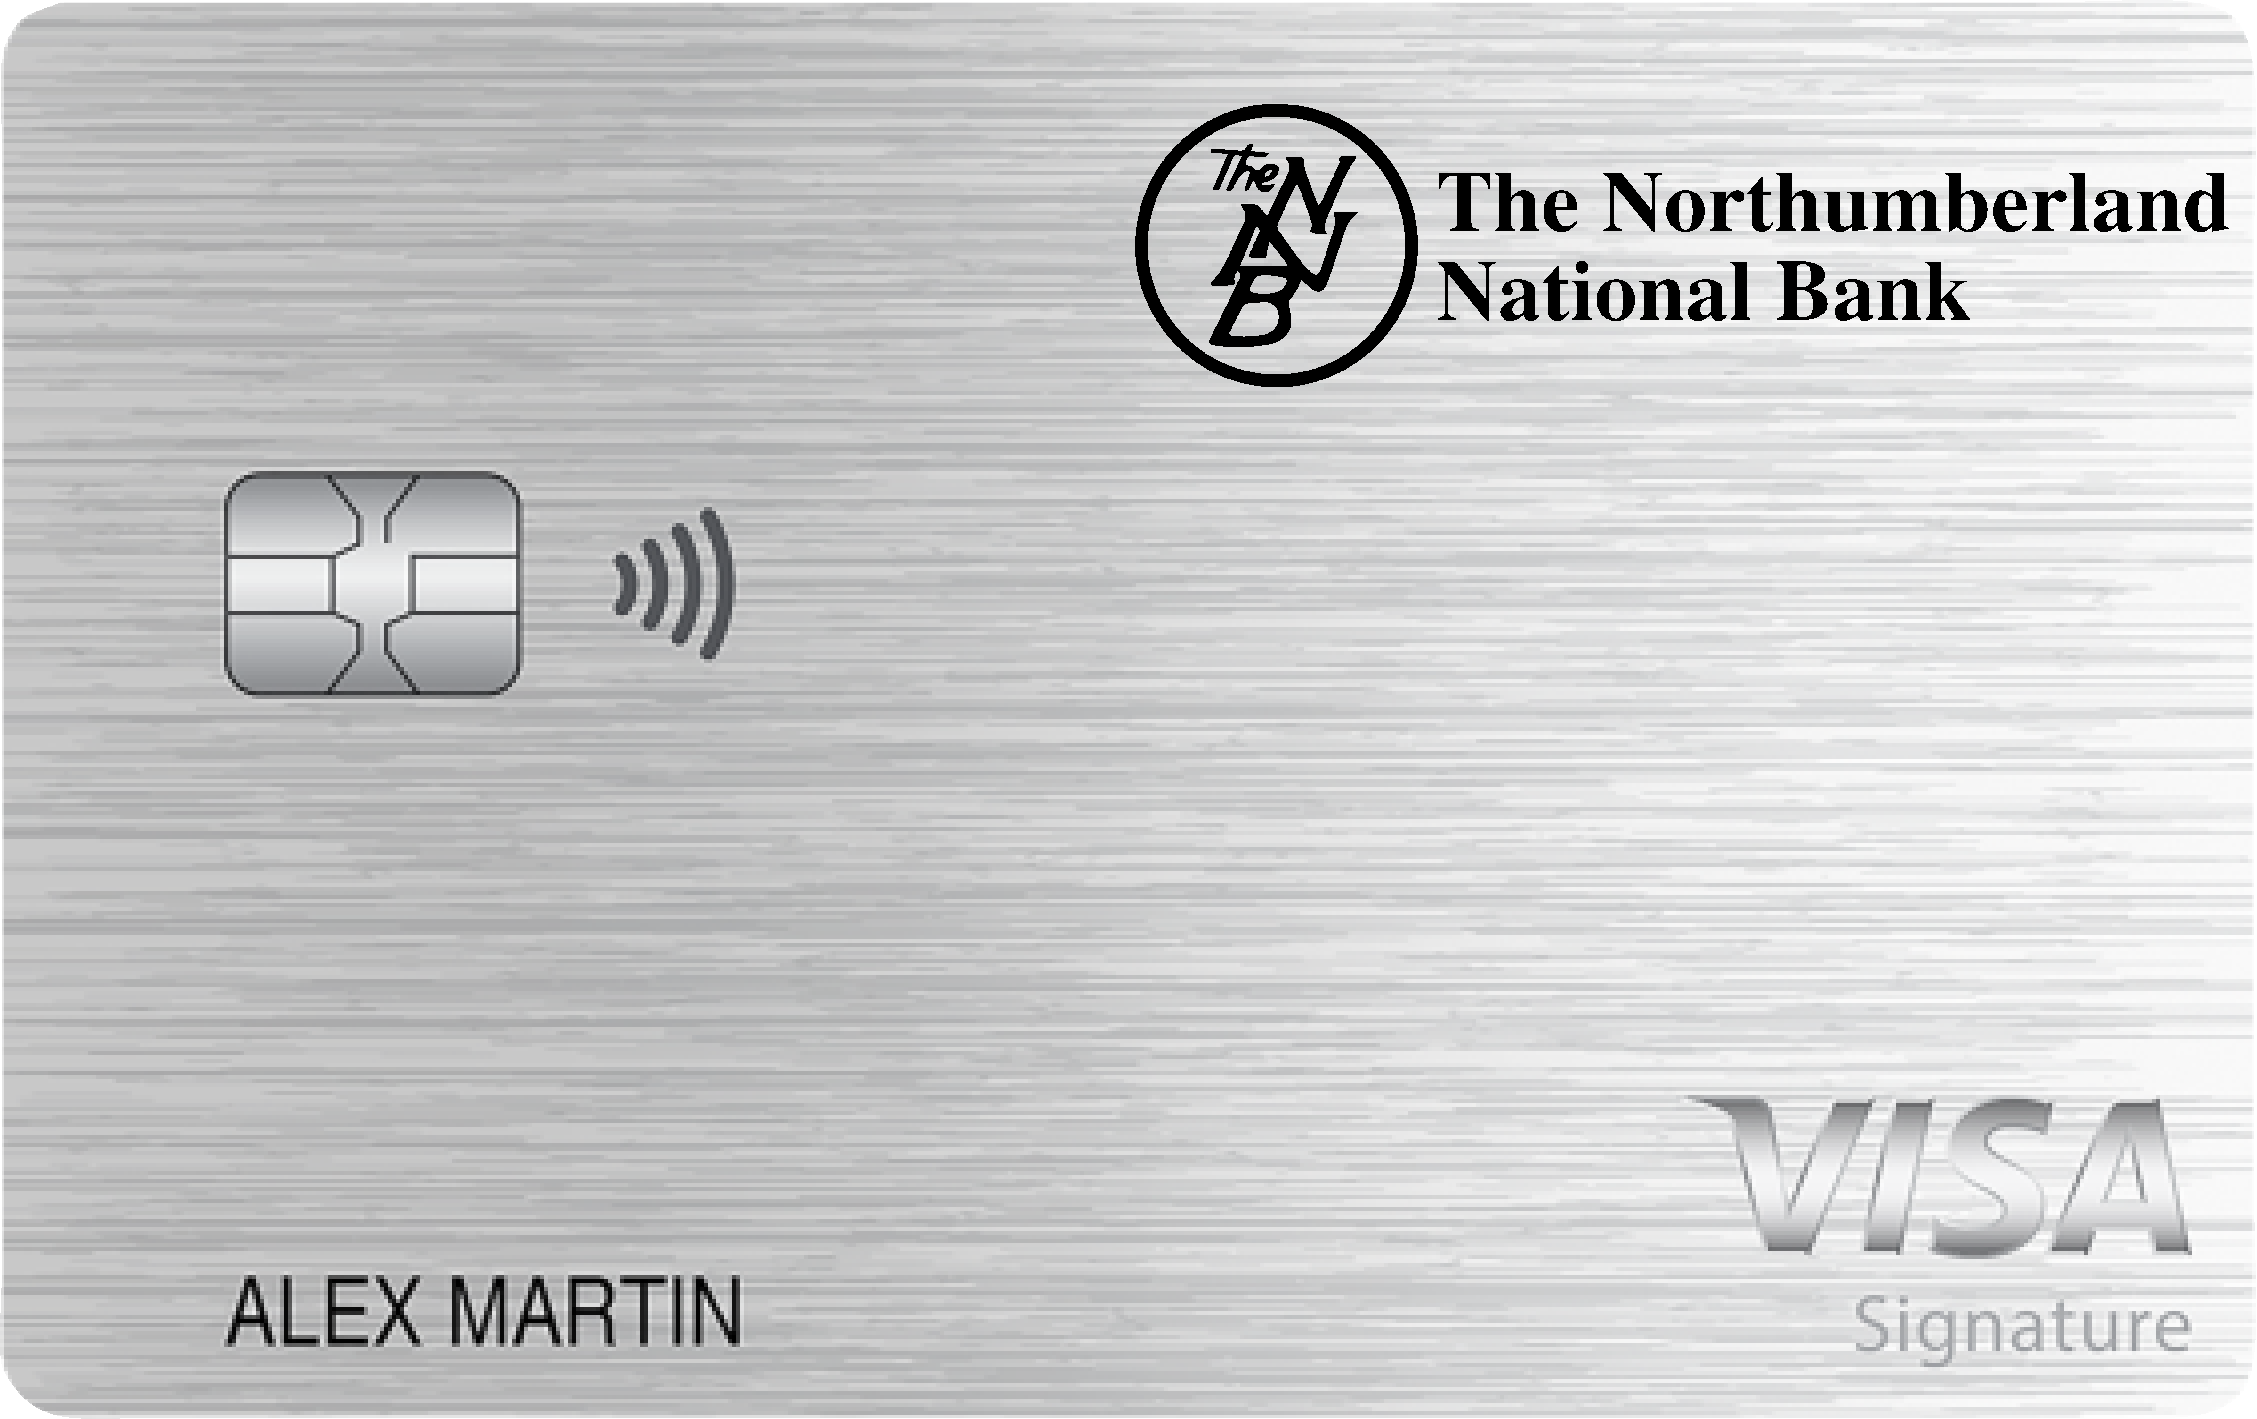 The Northumberland National Bank Max Cash Preferred Card